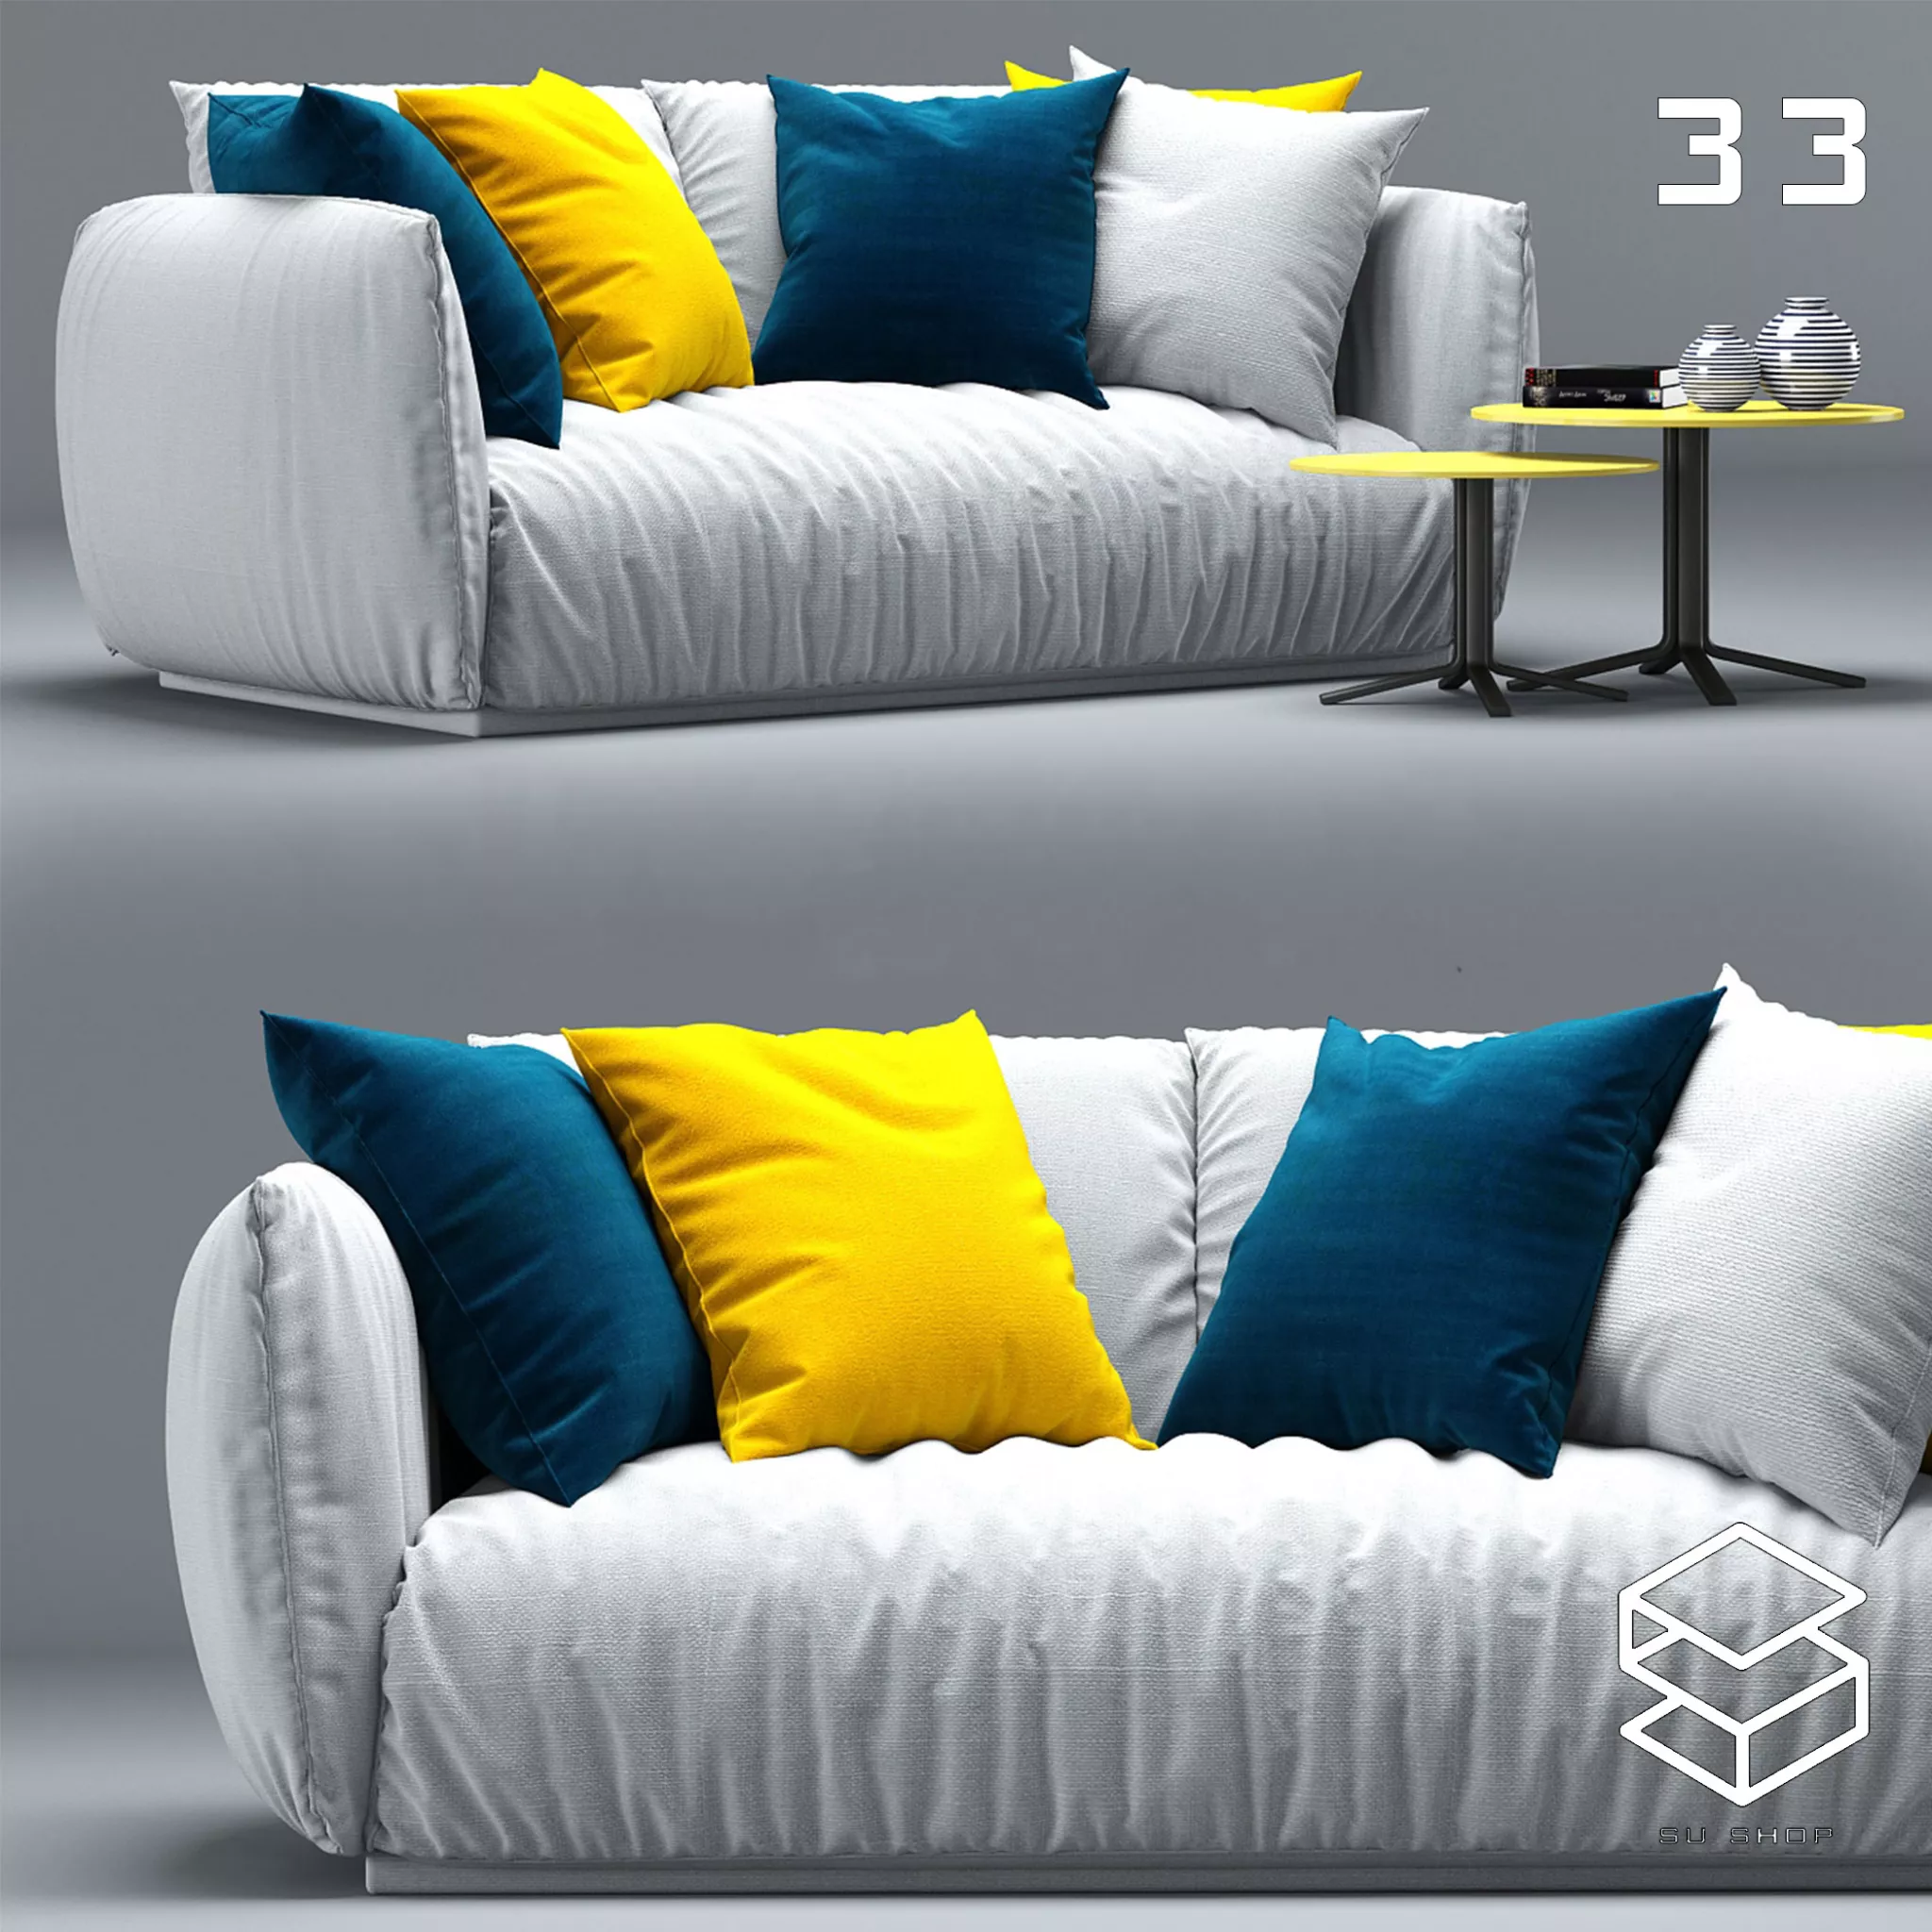 MODERN SOFA - SKETCHUP 3D MODEL - VRAY OR ENSCAPE - ID13641